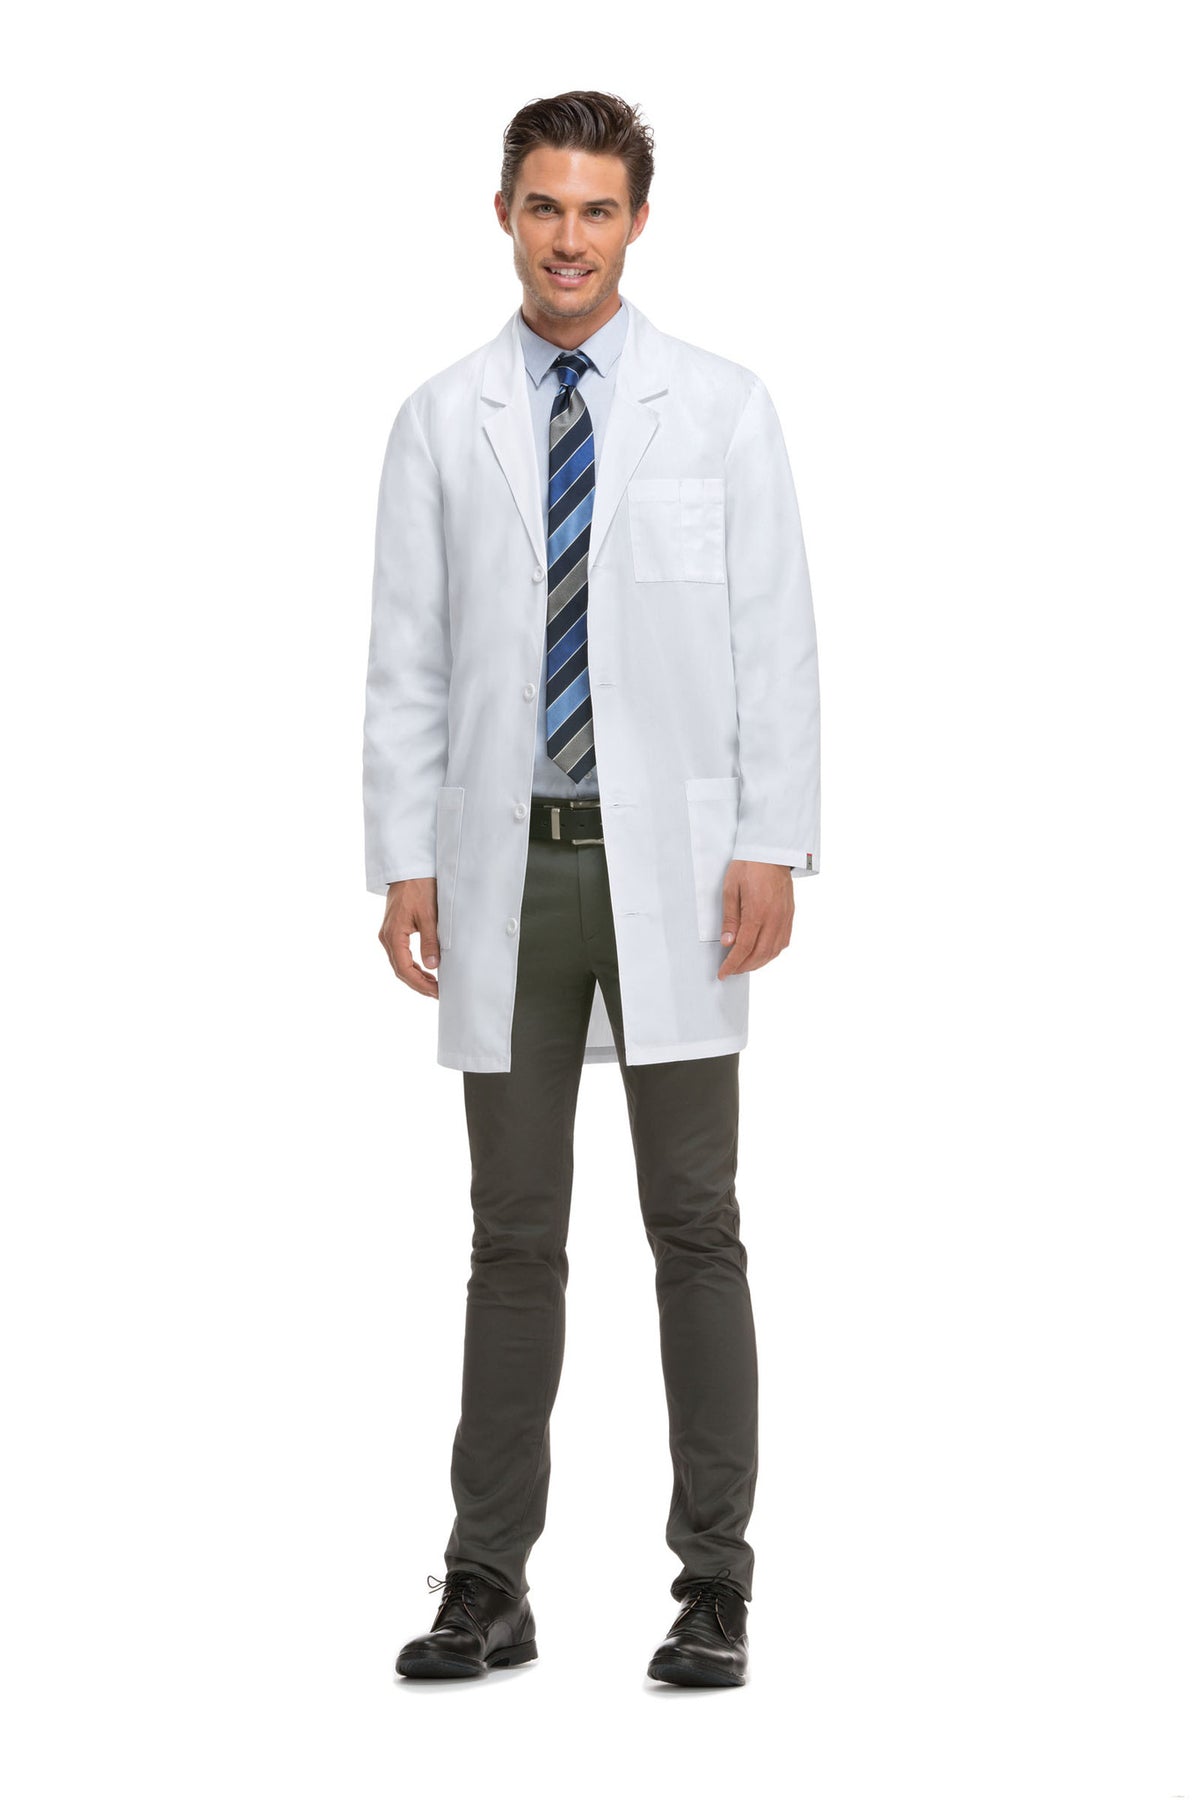 37" Unisex Antimicrobial Lab Coat - CLEARANCE